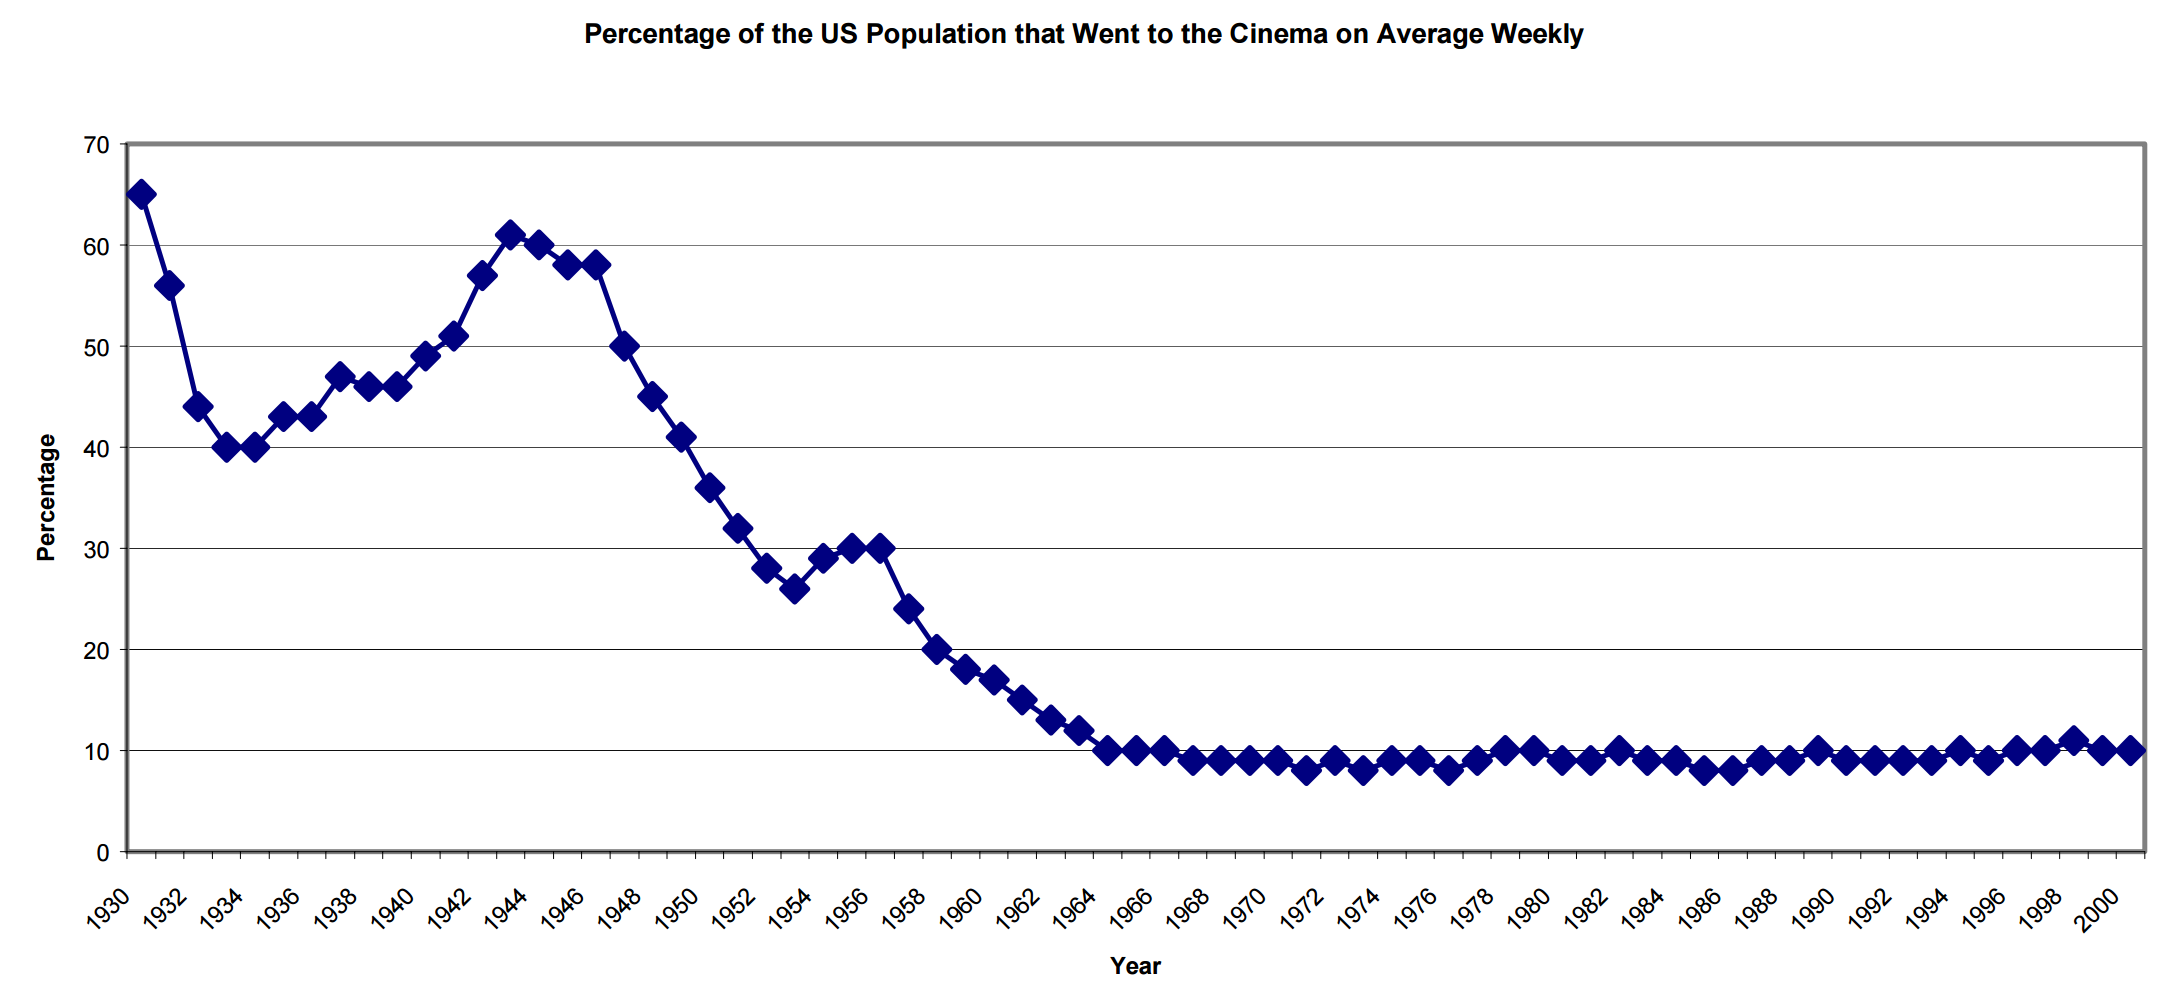 Percentage of US population with weekly theater attendence